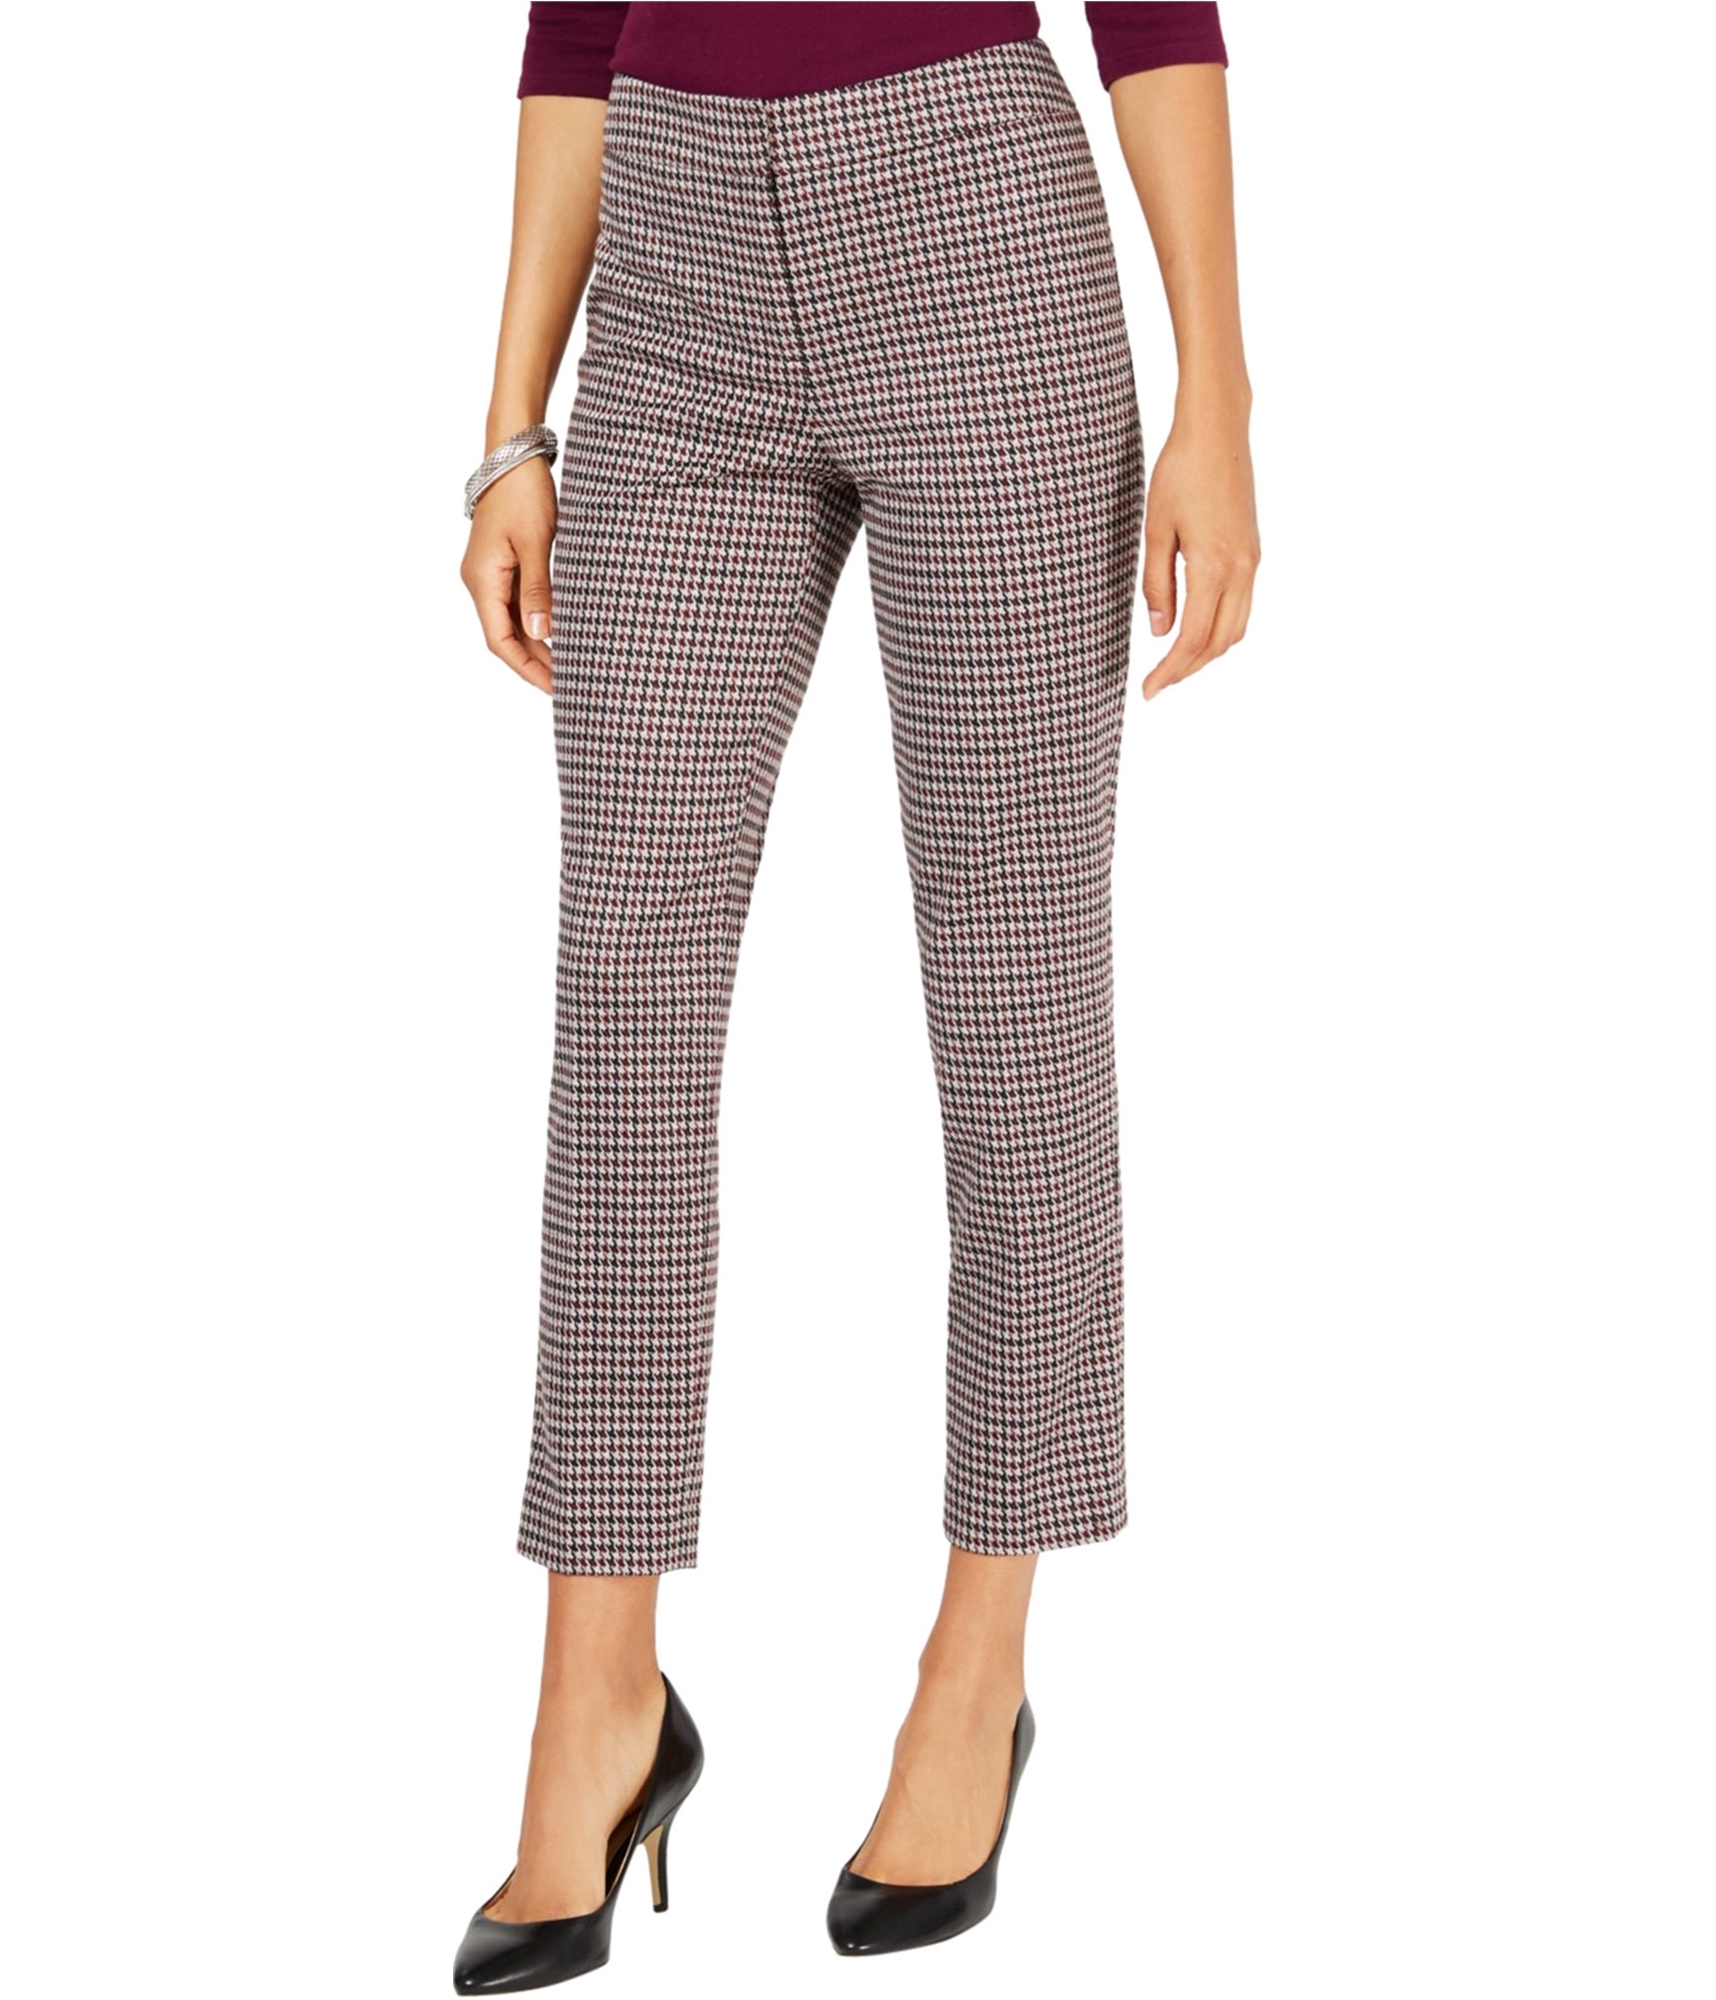 Buy a Womens Nine West Houndstooth Casual Trouser Pants Online |  TagsWeekly.com